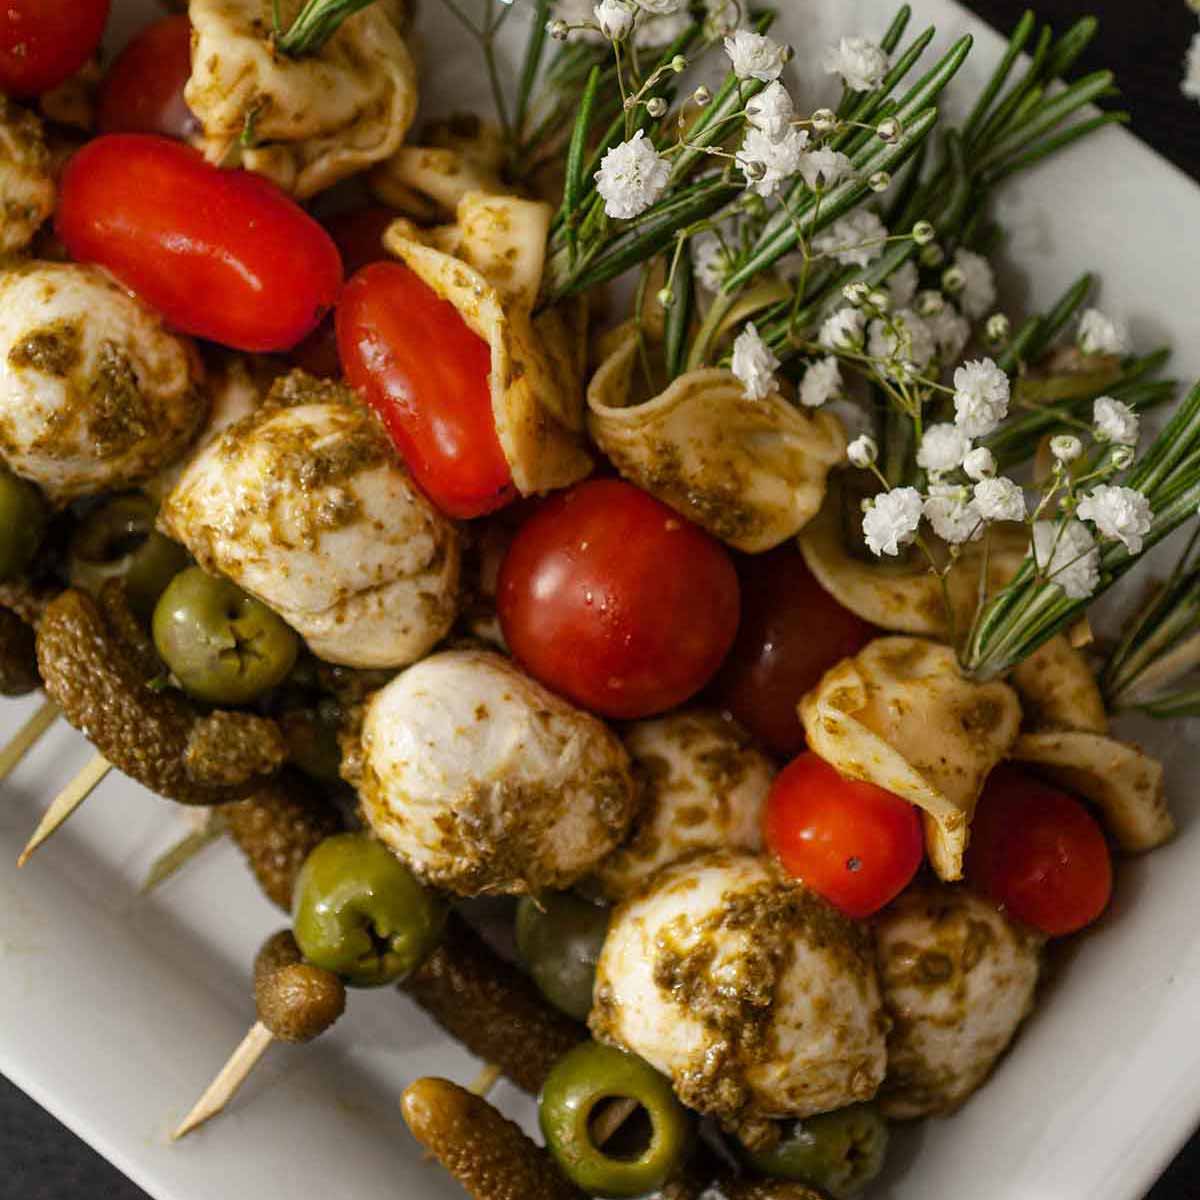 Antipasto appetizers on a plate with a title that says "10 Lovely Holiday Appetizers."